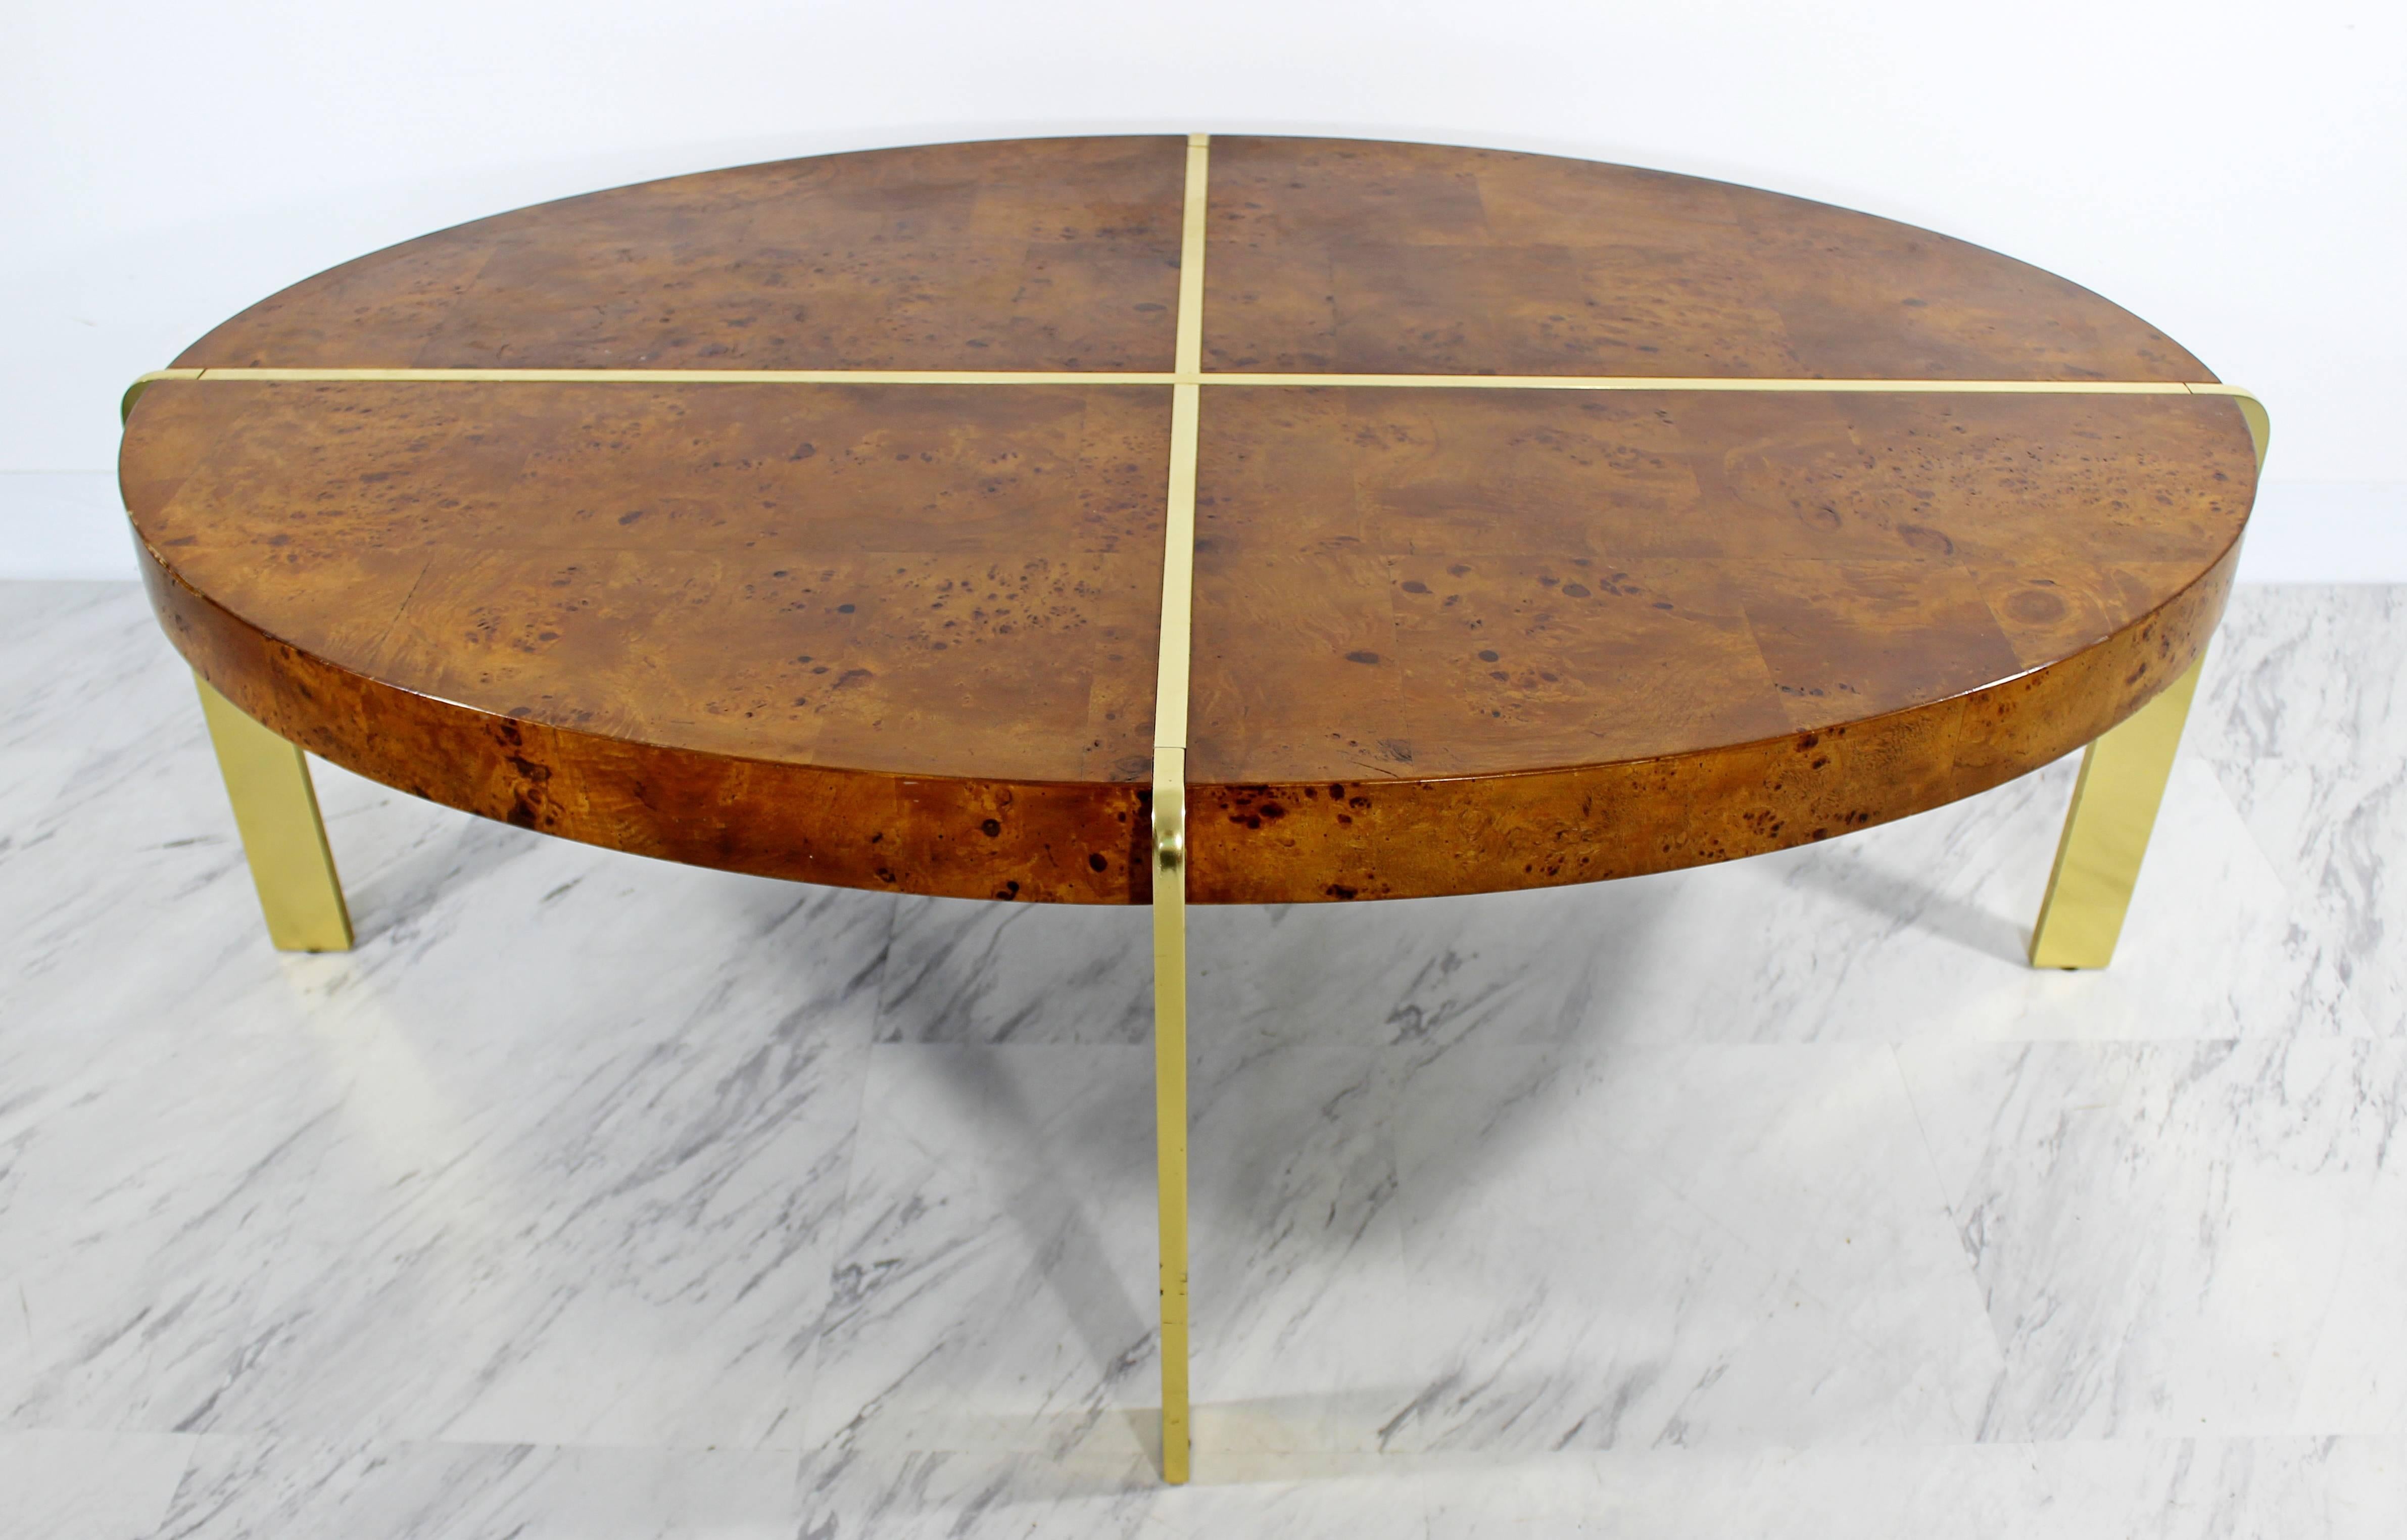 For your consideration is a gorgeous, burl wood coffee table, with brass, by Milo Baughman. In excellent condition. The dimensions are 46